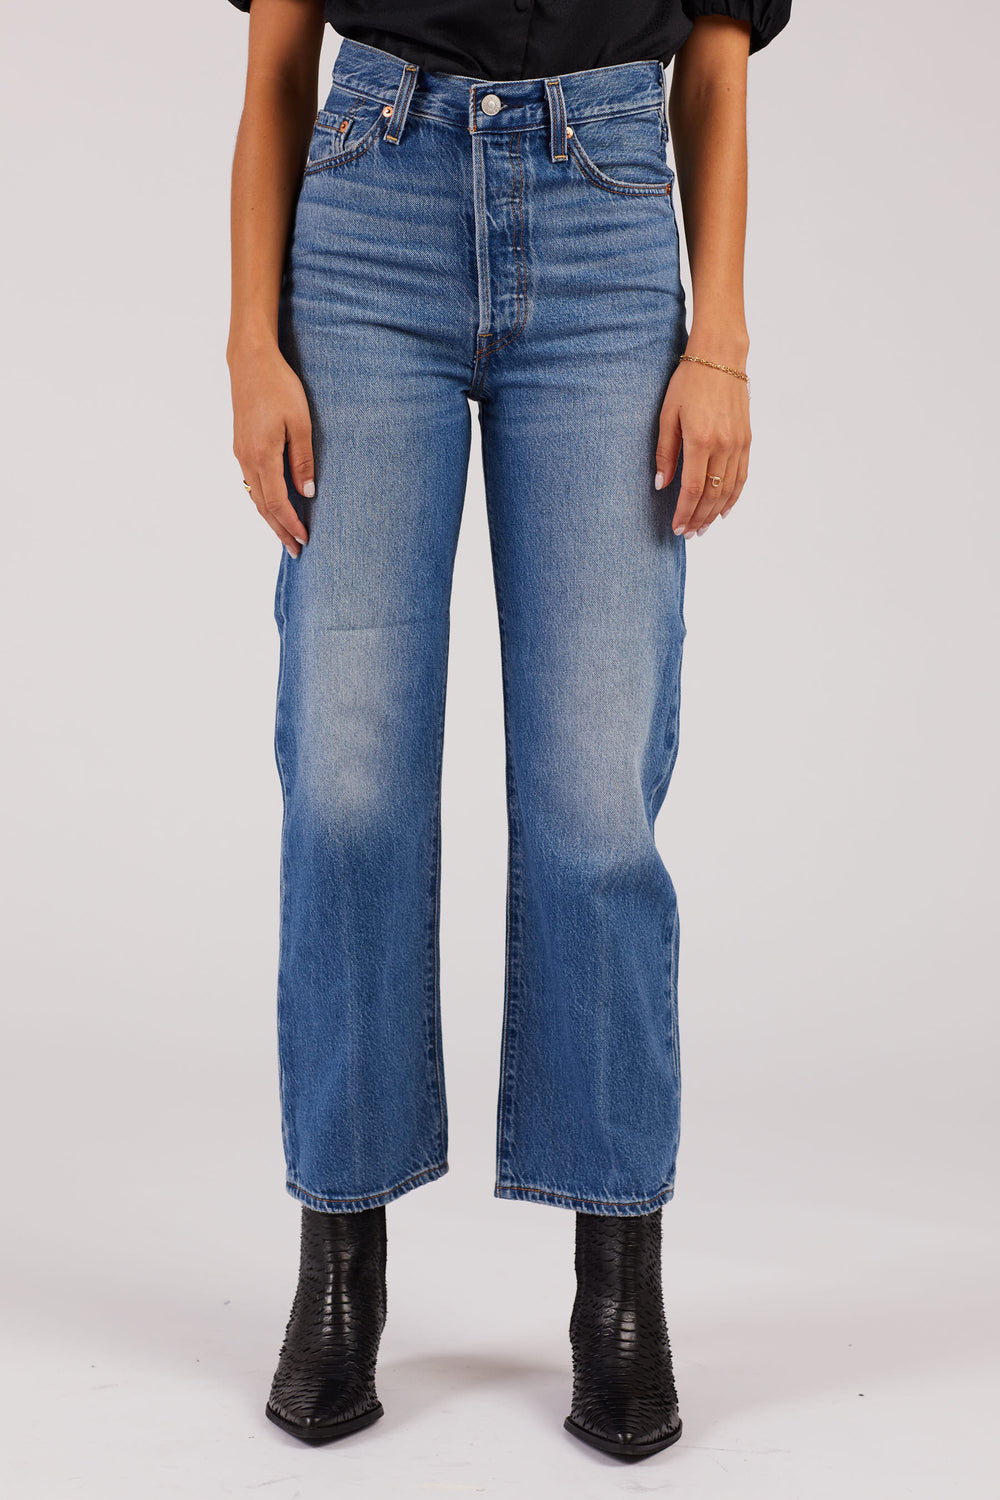 One Track Mind Ribcage Straight Jeans | Prism Boutique